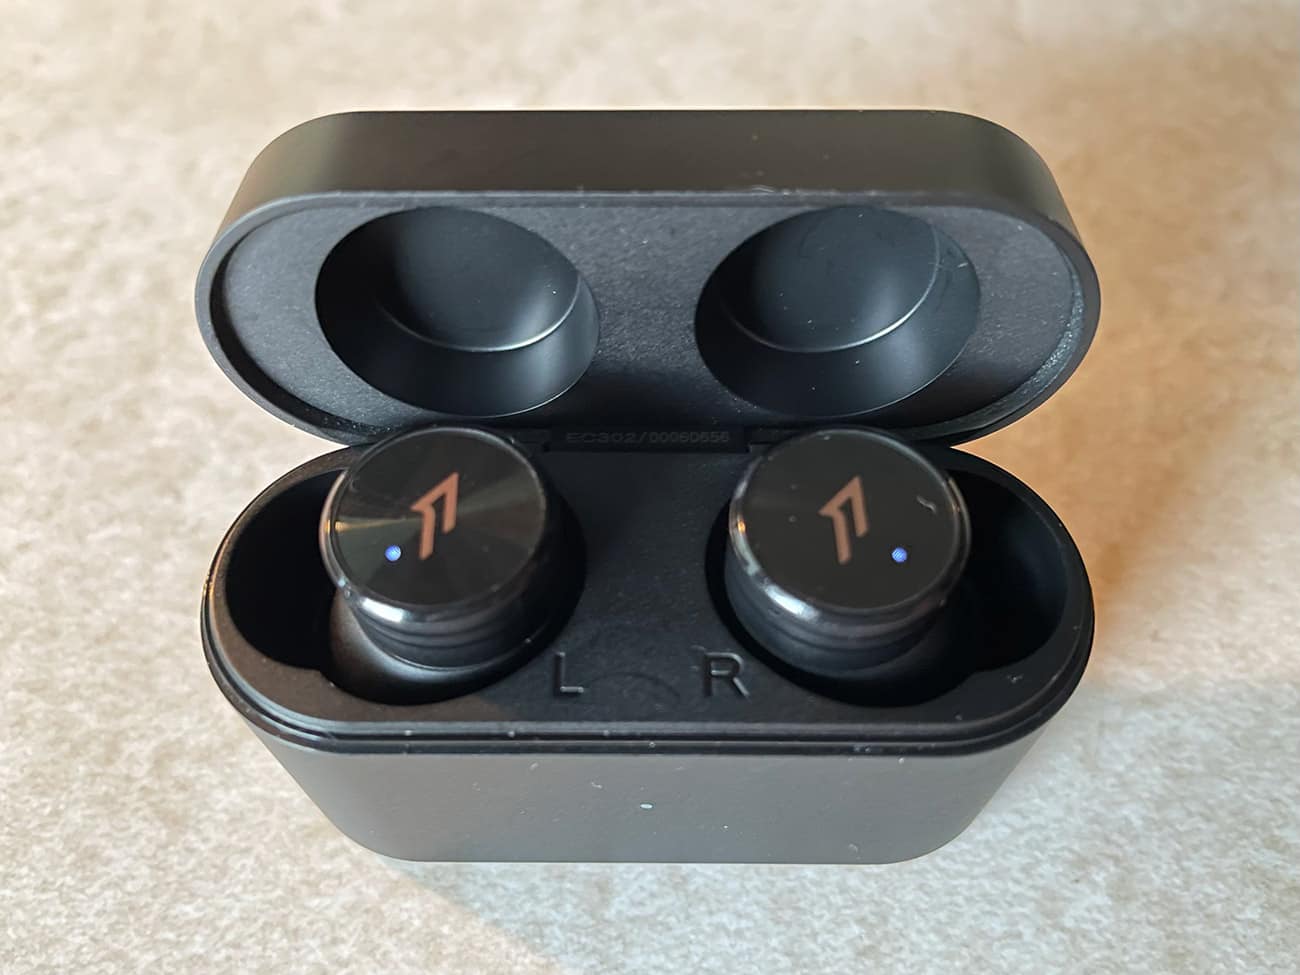 1MORE PistonBuds Pro Hybrid Active Noise Canceling Wireless Earbuds review 05